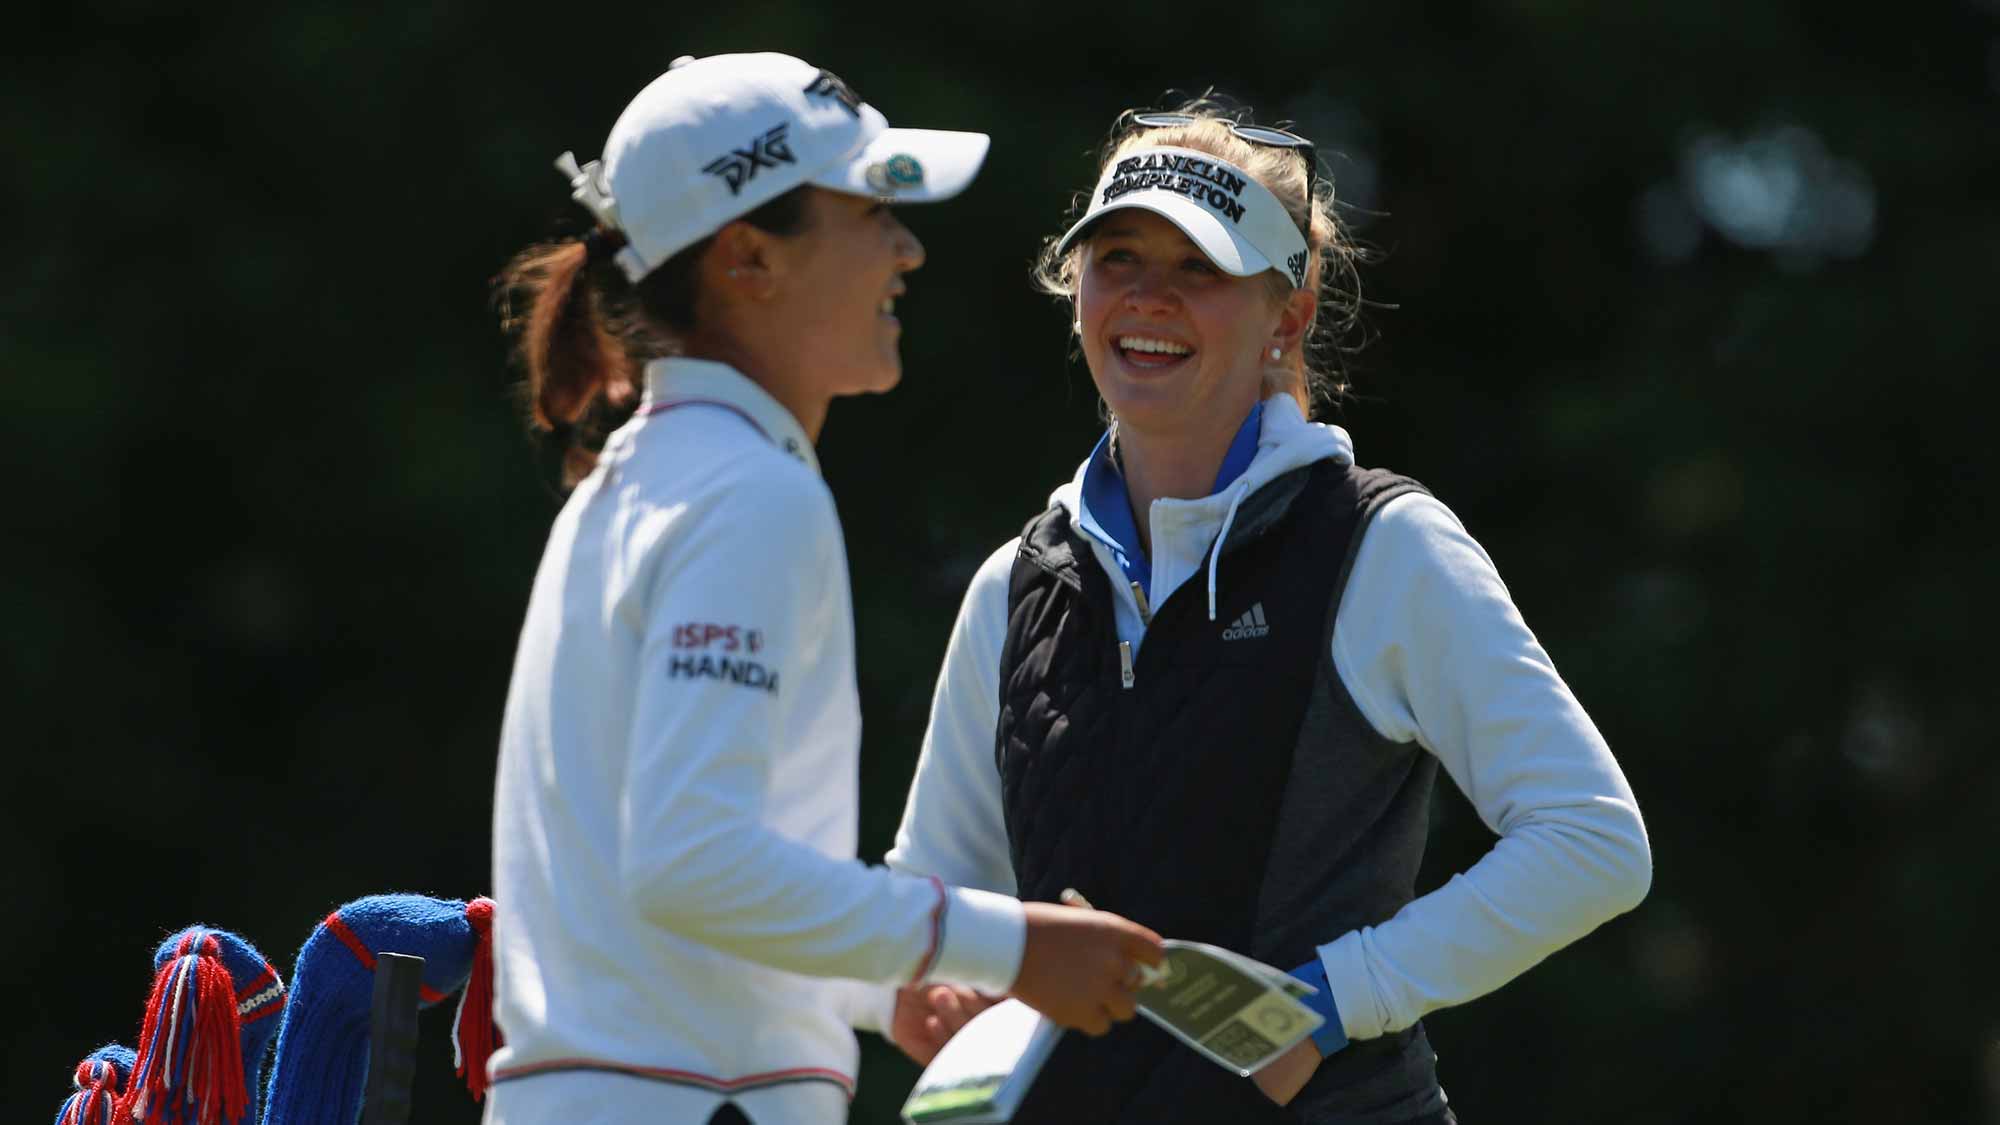 Lydia Ko of New Zealand and Jessica Korda (R) talk on the third hole during the final round of the LPGA MEDIHEAL Championship at Lake Merced Golf Club on April 29, 2018 in Daly City, California